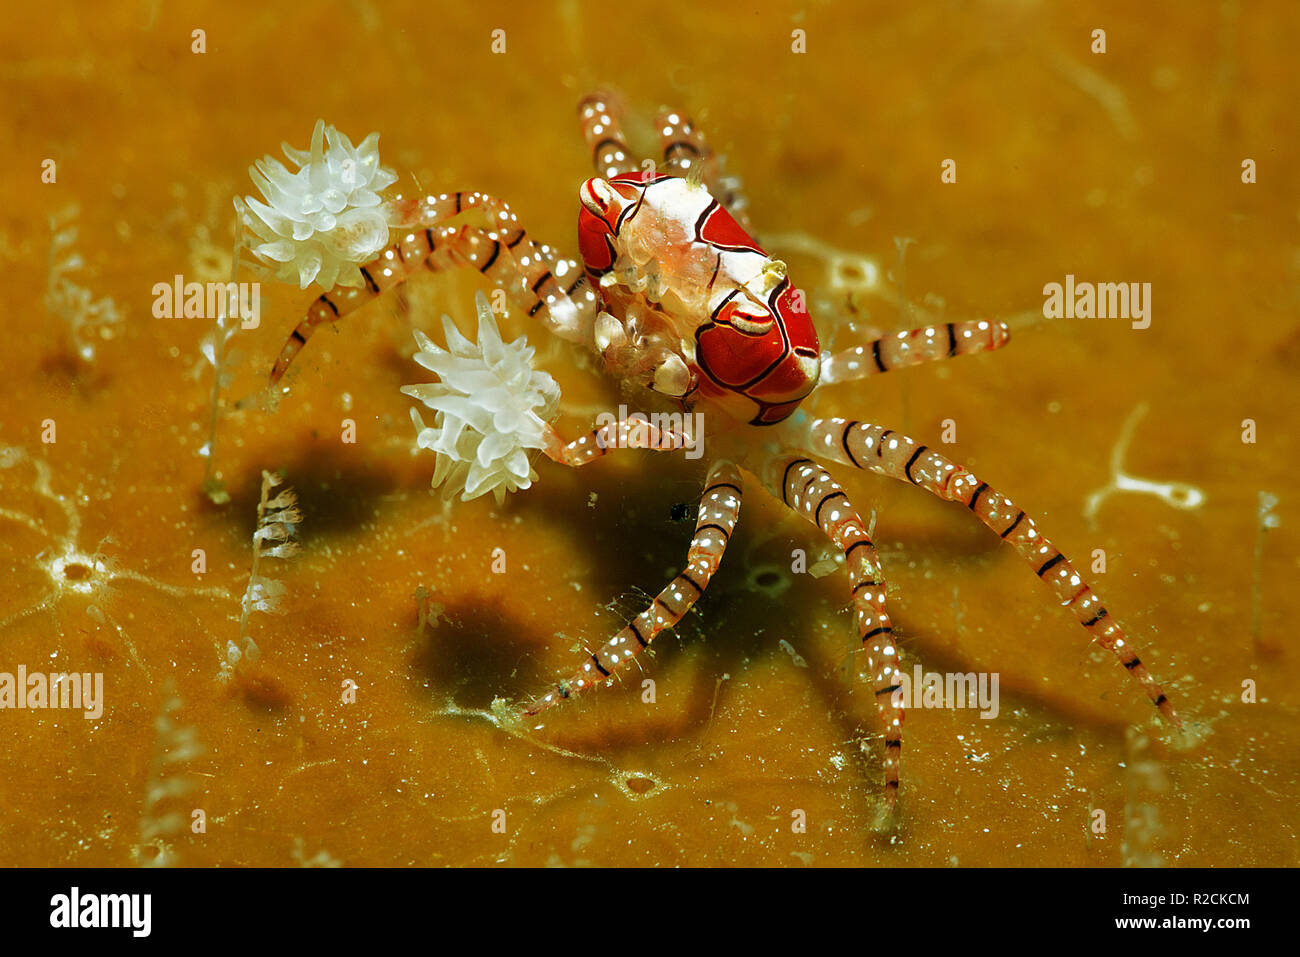 Boxer crab or Pom Pom Crab (Lybia tessellata) with eggs, is associated with anemones (Triactis sp.), Walindi, Papua Neu Guinea Stock Photo